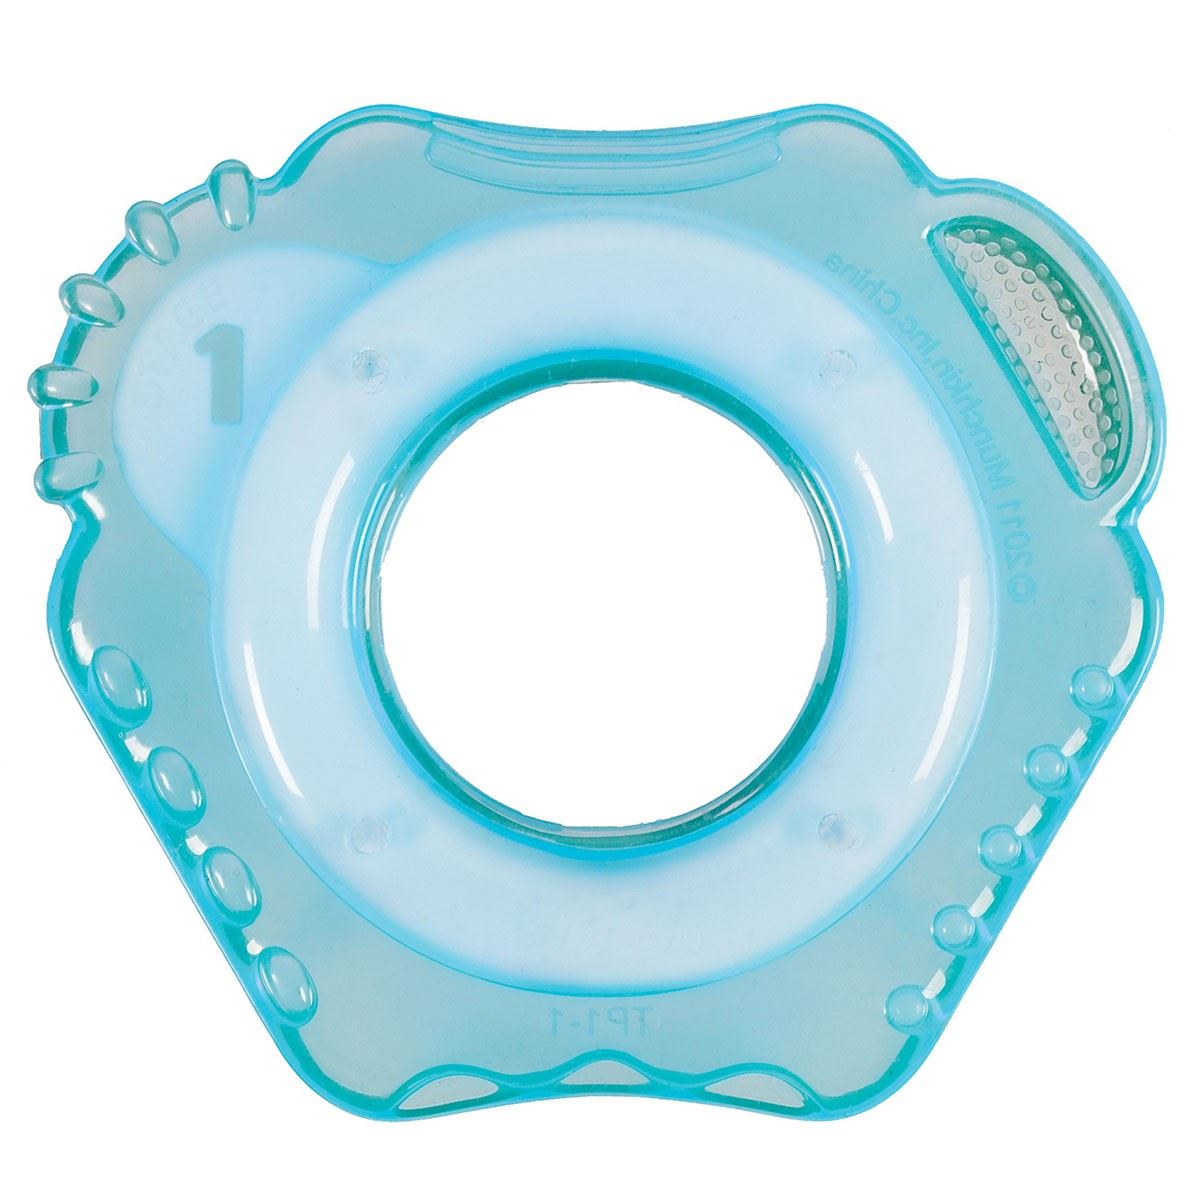 Munchkin Front Teeth Teether Stage 1